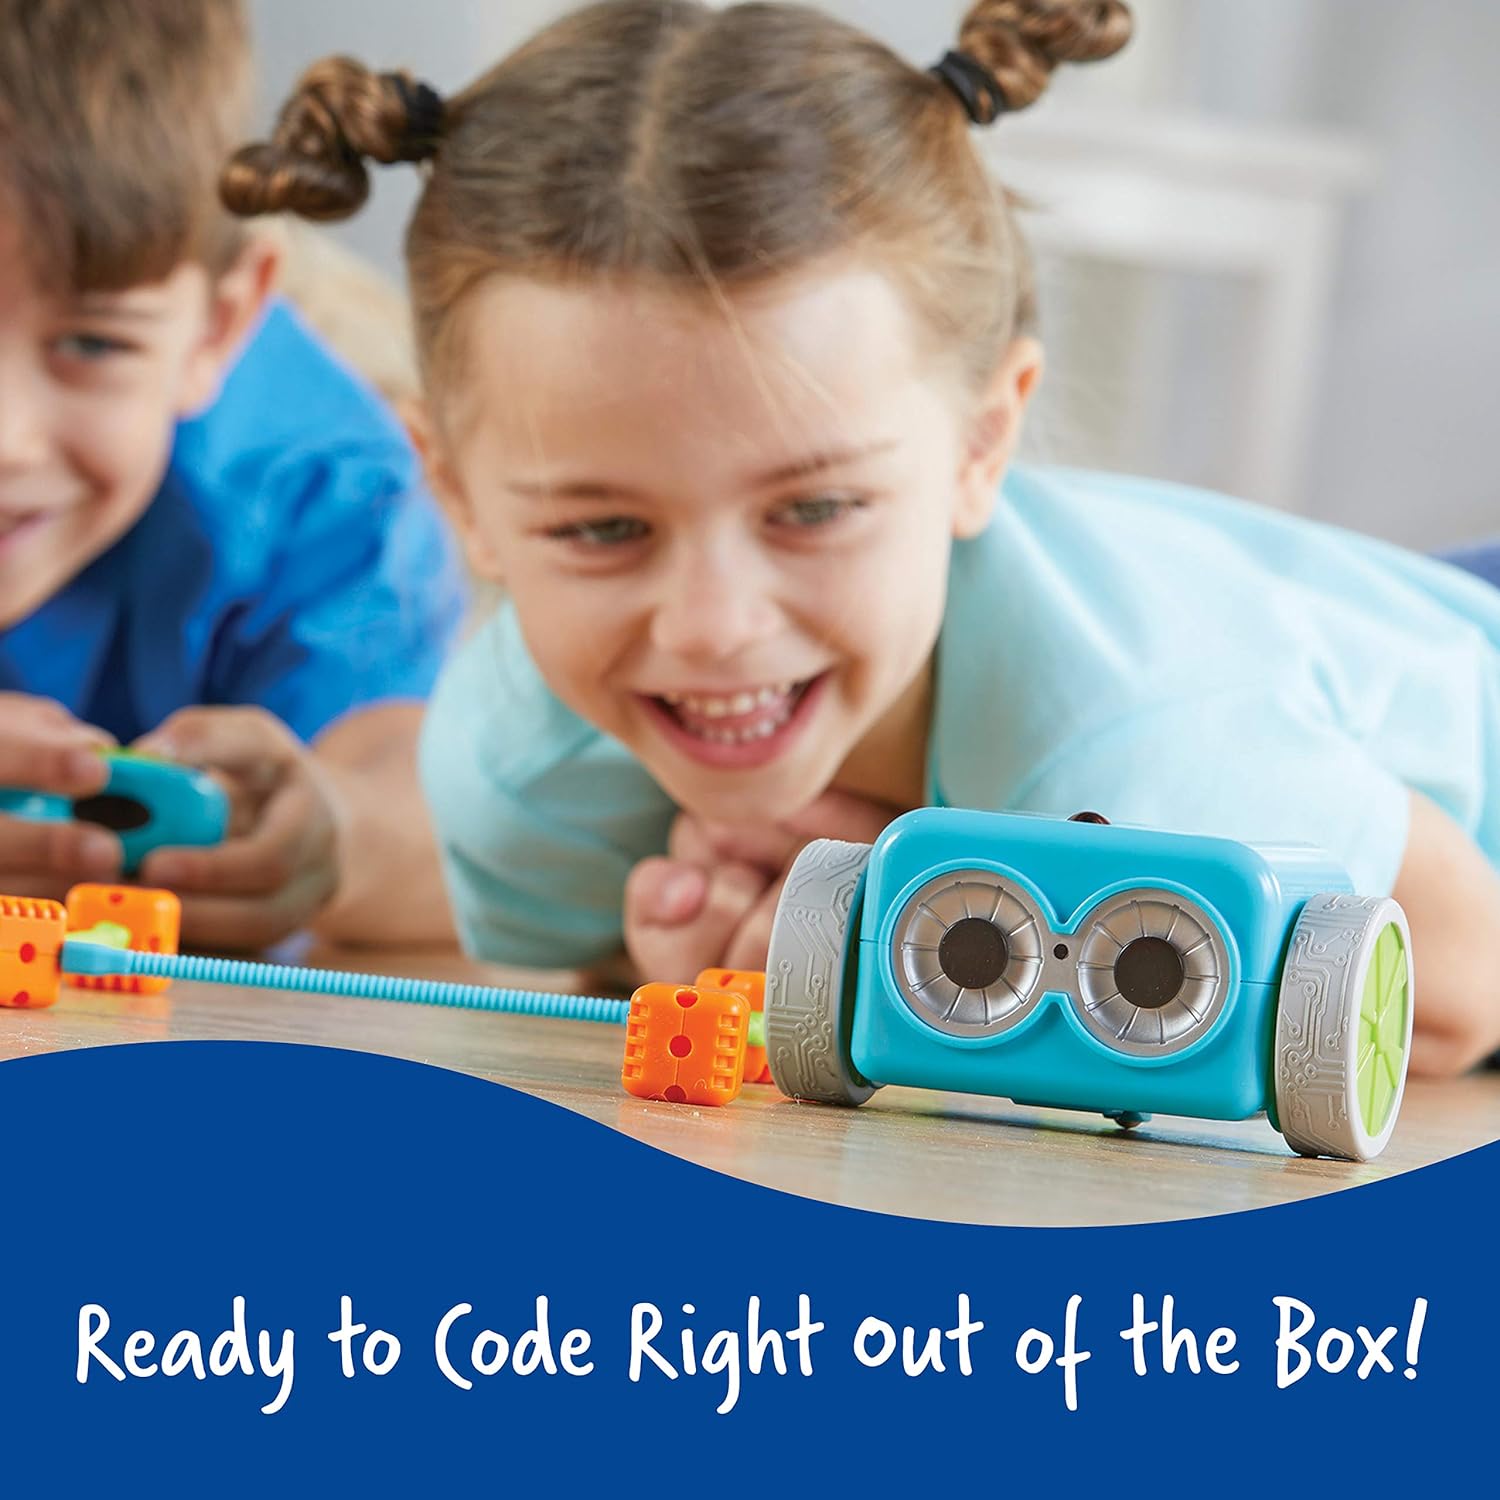 Learning Resources Botley The Coding Robot Activity Set - 77 Pieces, Ages 5+, Screen-Free Coding Robots for Kids, STEM Toys for Kids, Programming for Kids